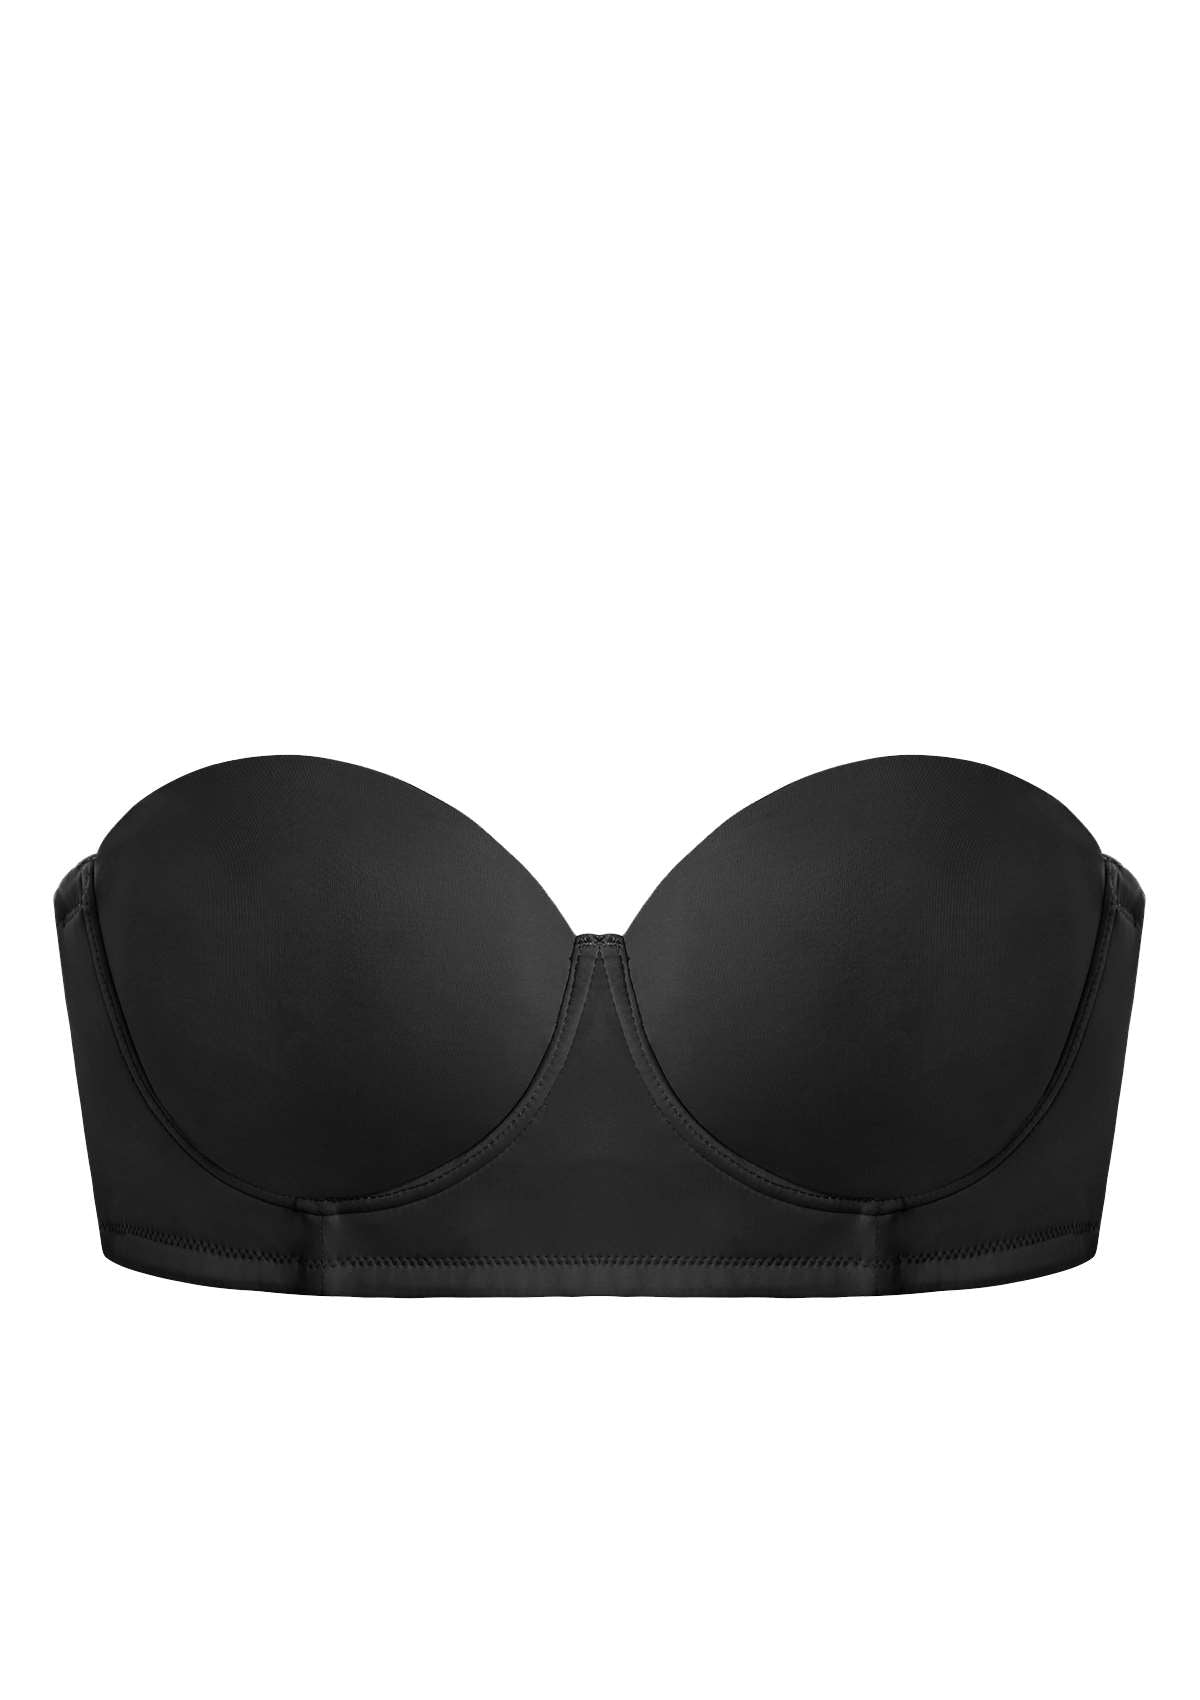 HSIA Margaret Molded Convertible Multiway Classic Strapless Bra - Black / 36 / H